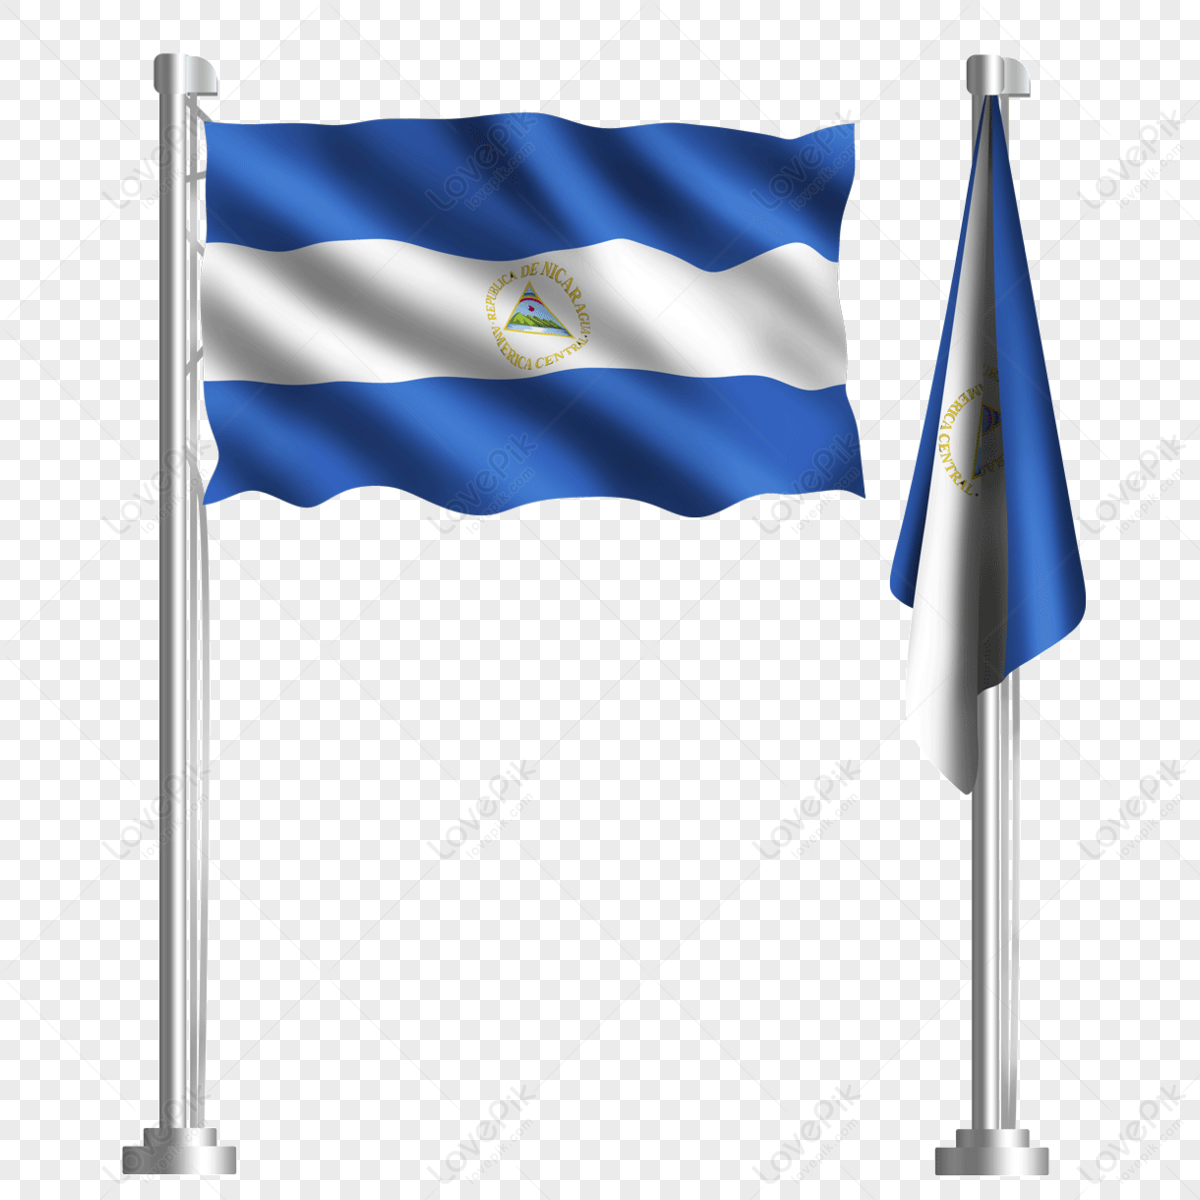 Nicaragua Bandera PNG Images With Transparent Background | Free ...